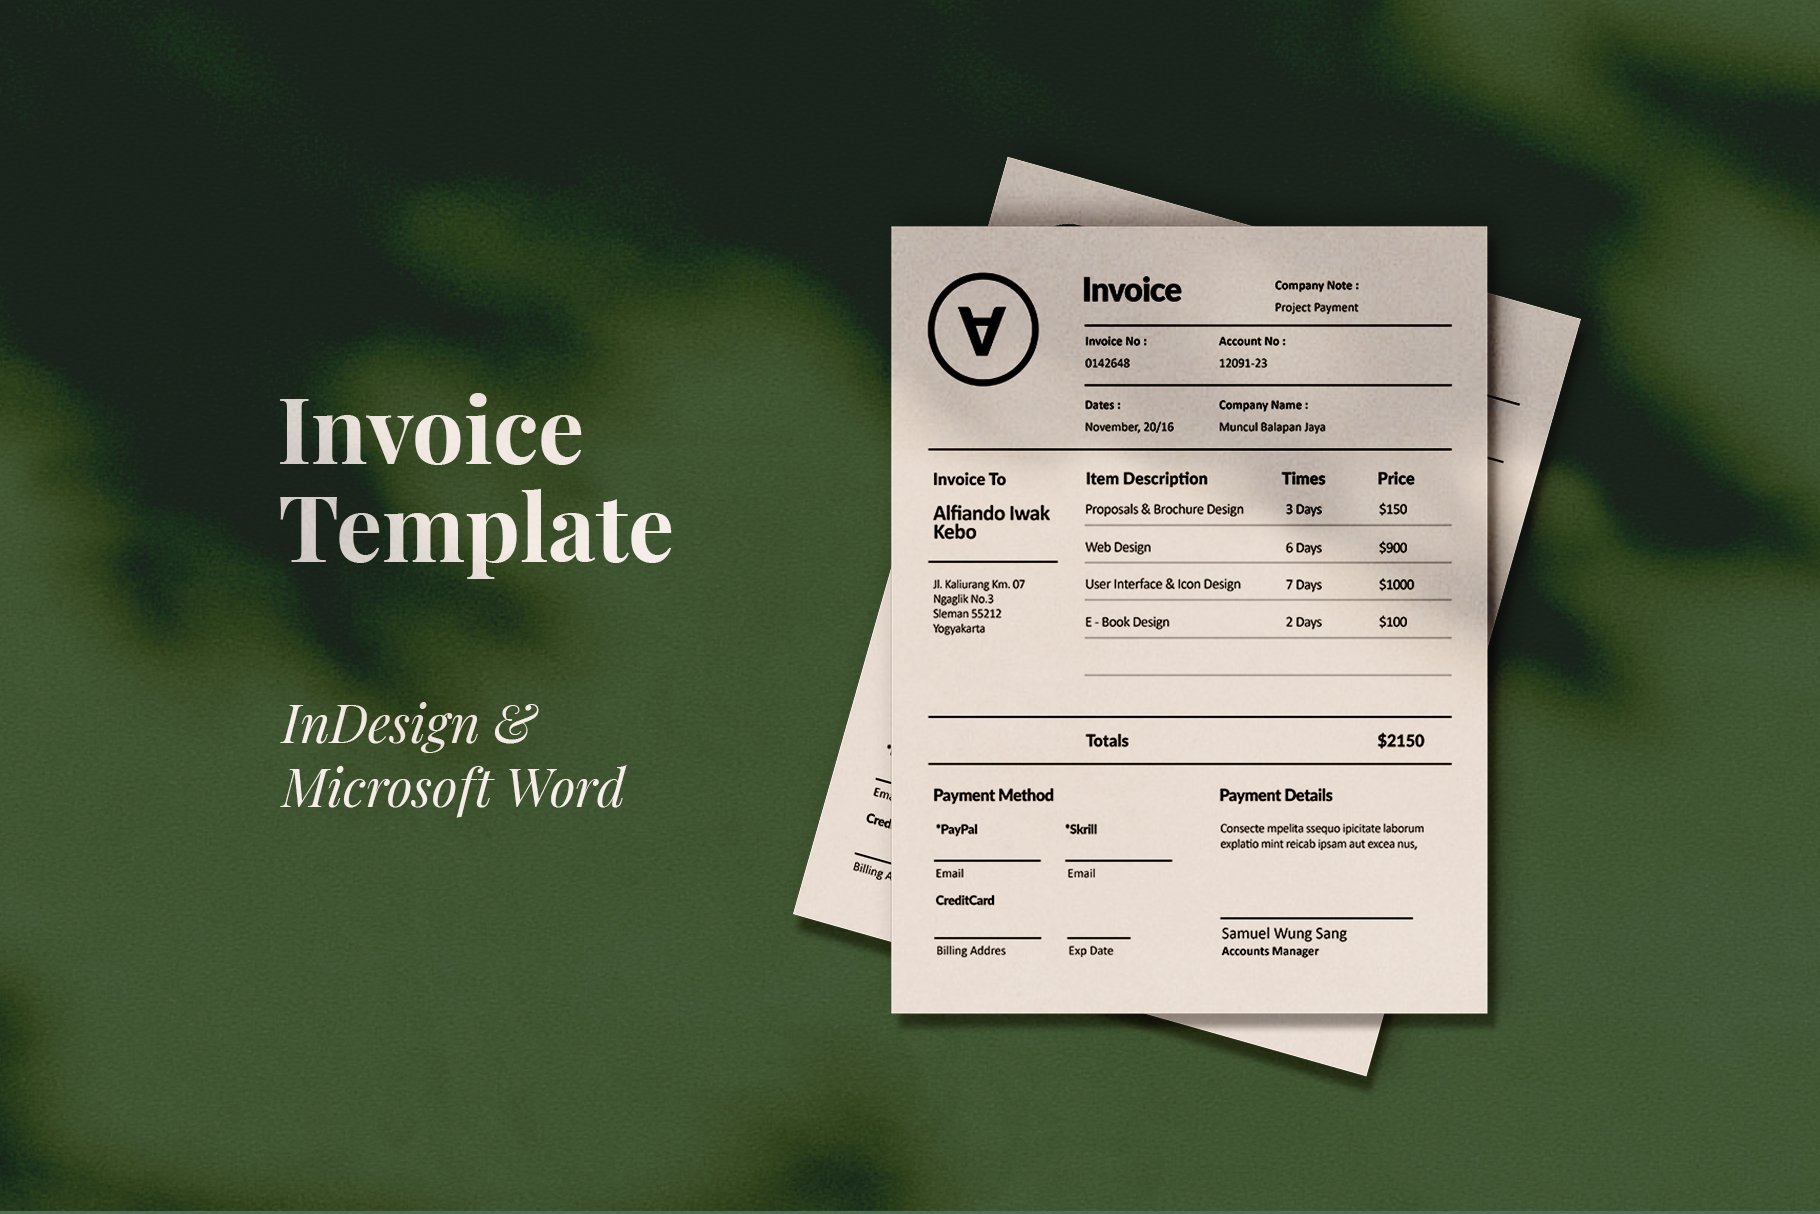 Polem Invoice Template (Indd+MsWord) cover image.